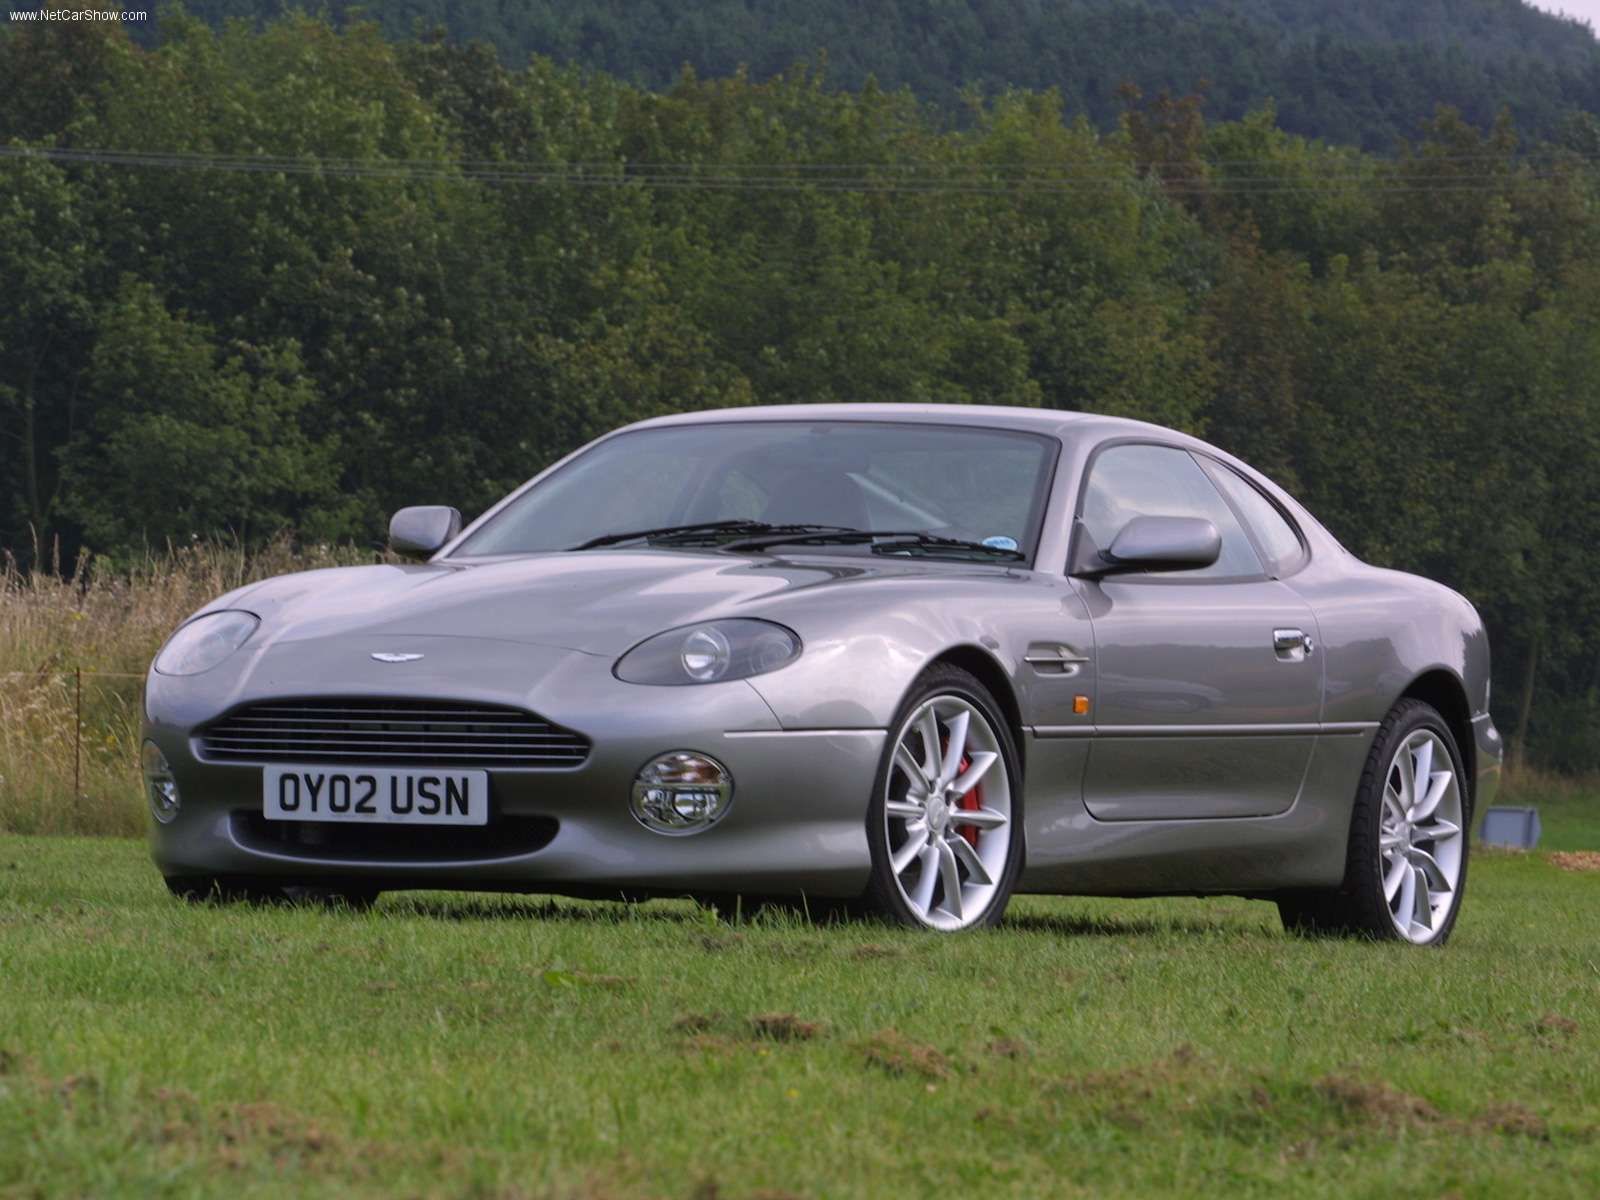 Aston Martin DB7 parked outside